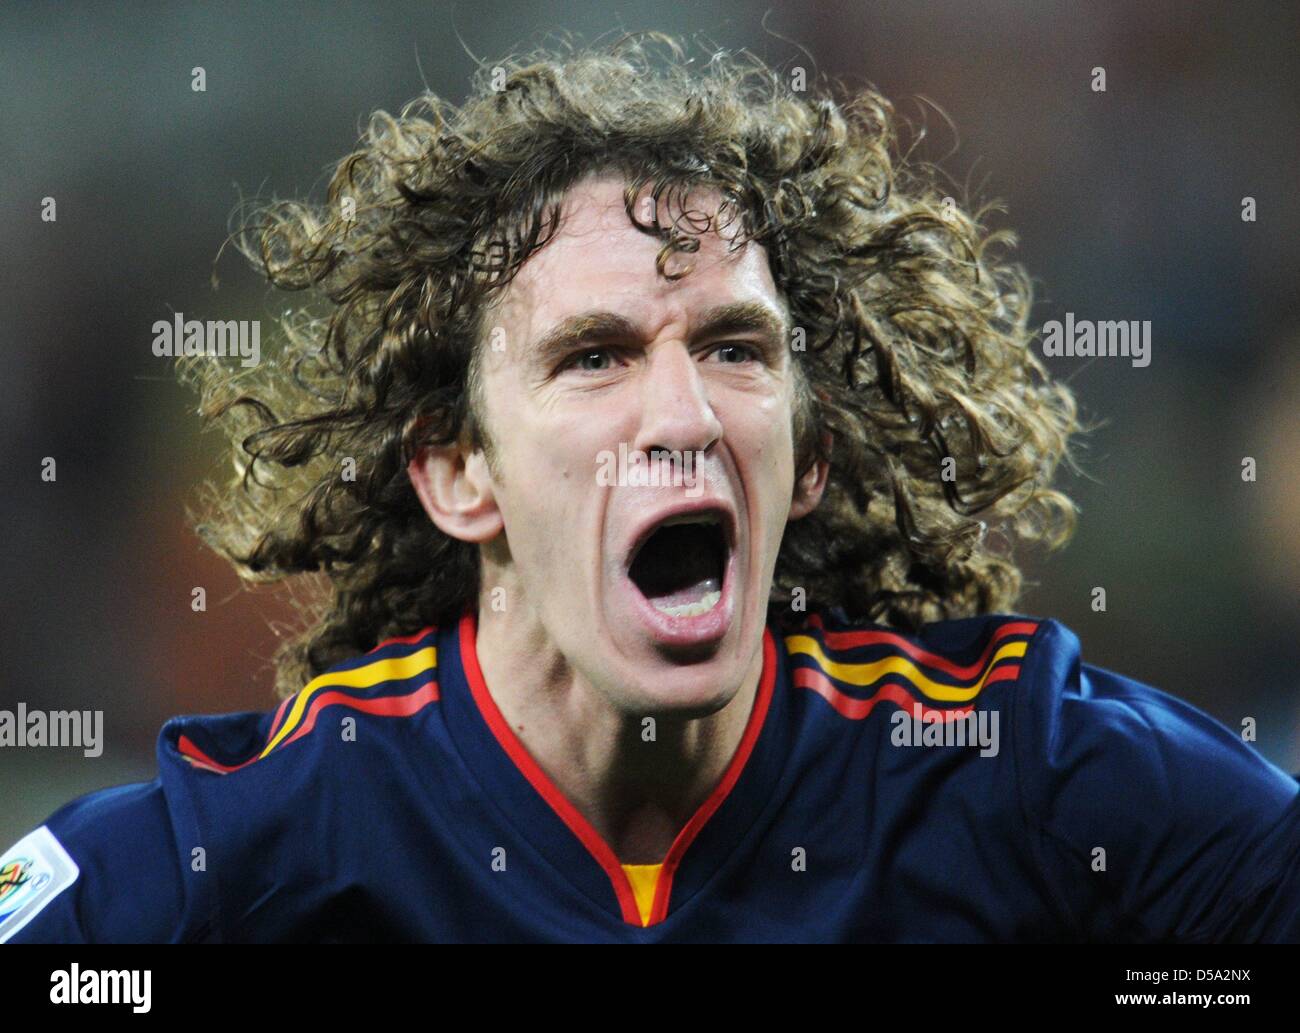 Carles Puyol of Spain celebrates after the final whistle of the 2010 FIFA World Cup final match between the Netherlands and Spain at the Soccer City Stadium in Johannesburg, South Africa 11 July 2010. Photo: Bernd Weissbrod dpa - Please refer to http://dpaq.de/FIFA-WM2010-TC  +++(c) dpa - Bildfunk+++ Stock Photo